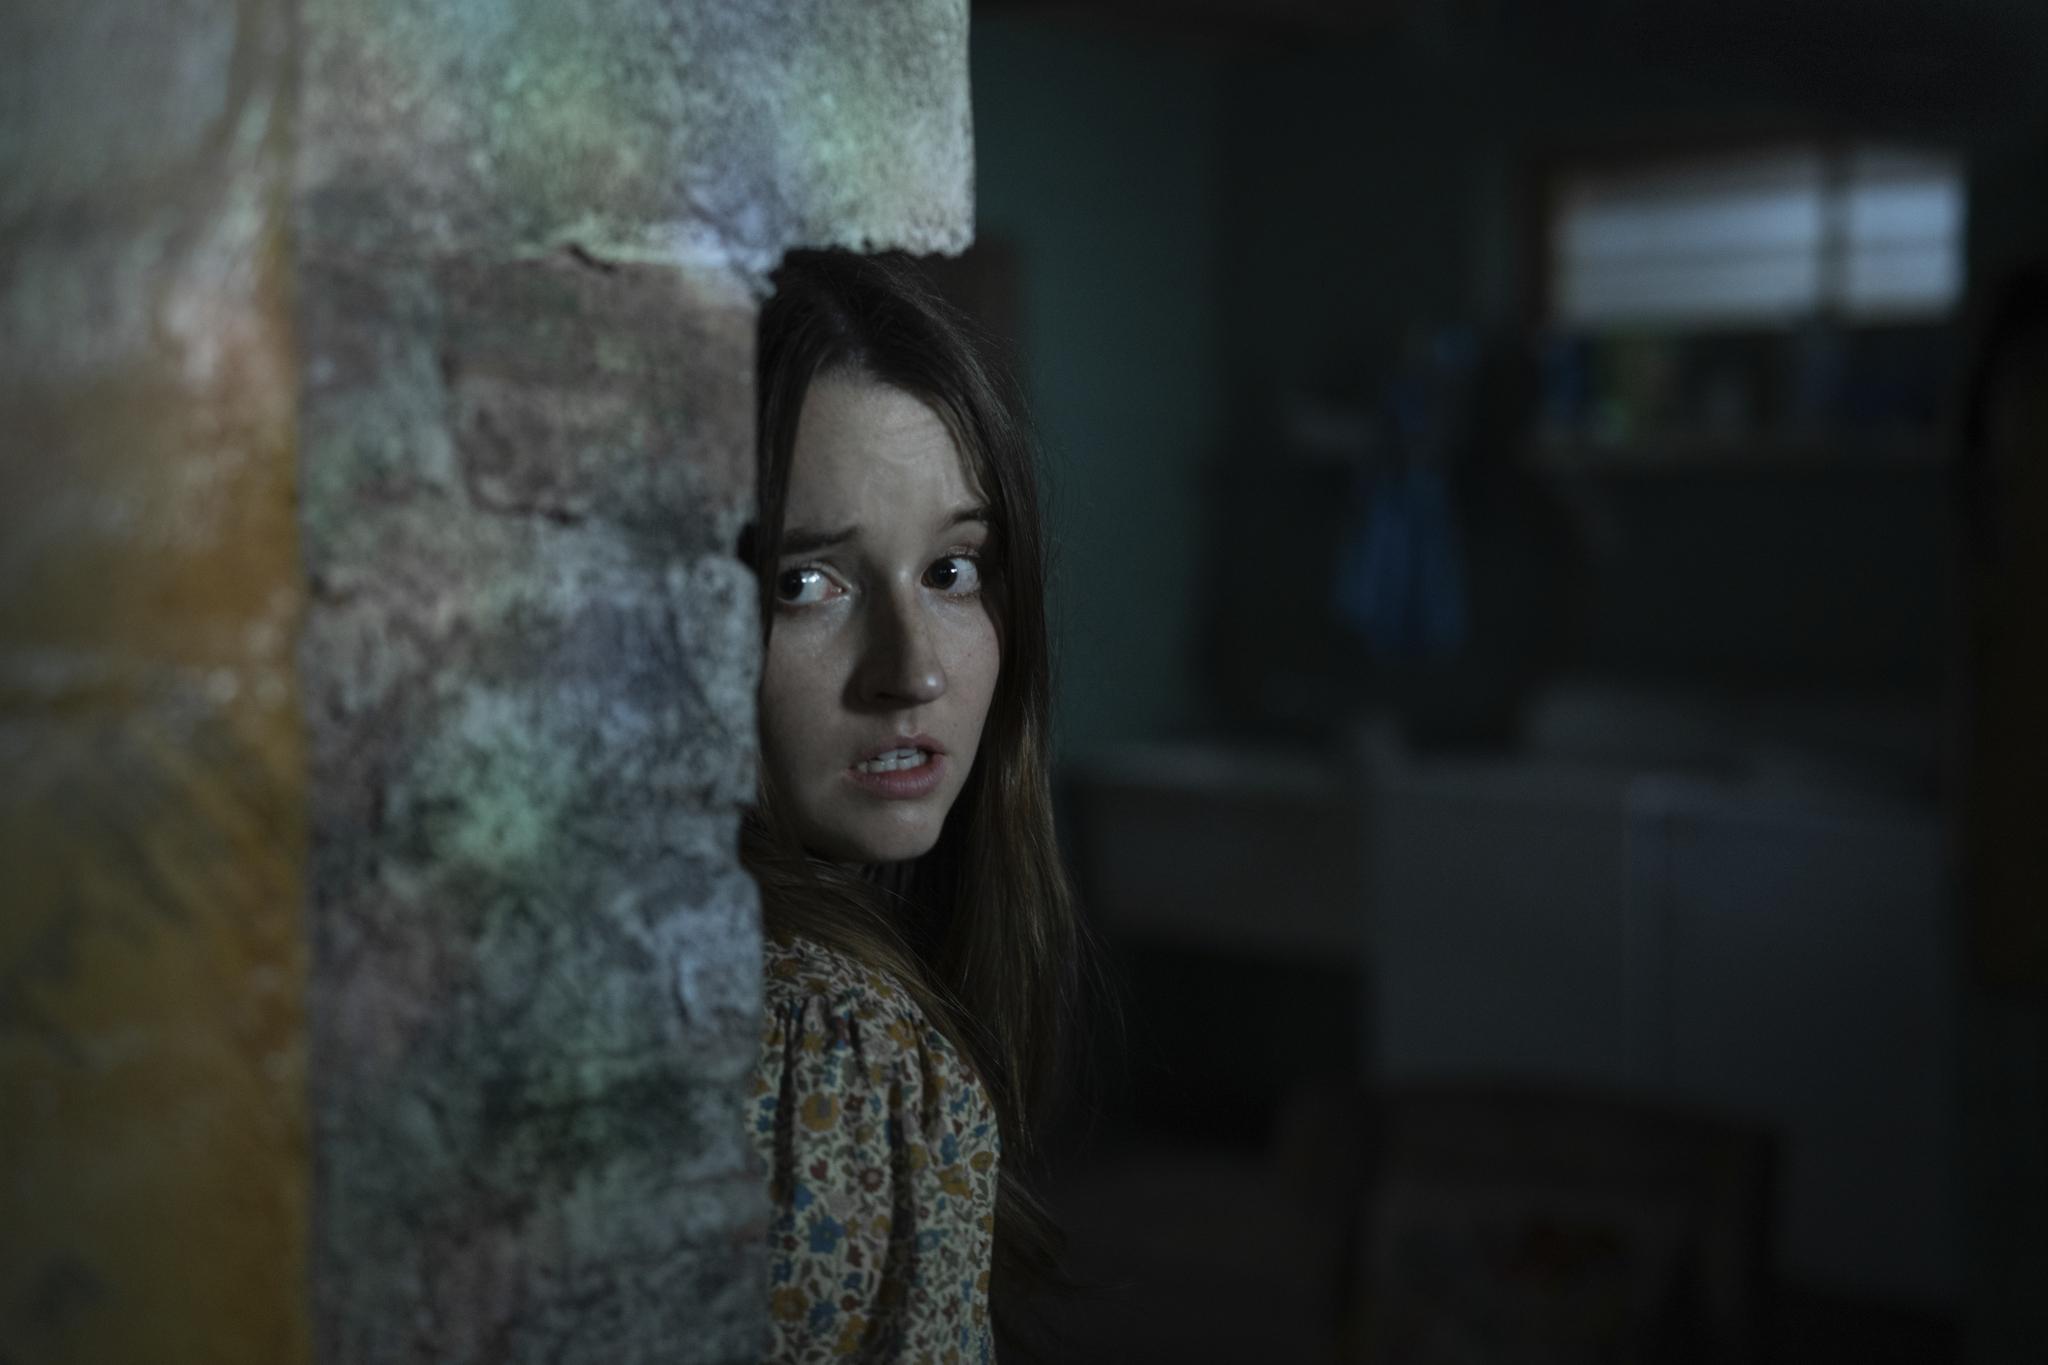 As Brynn desperately tries to protect her childhood home, she is thrust into a traumatic ordeal that forces her to confront both the horrors of her past and the need to secure her future. This spine-tingling thriller offers a fresh take on the home invasion genre and promises to keep viewers on the edge of their seats.